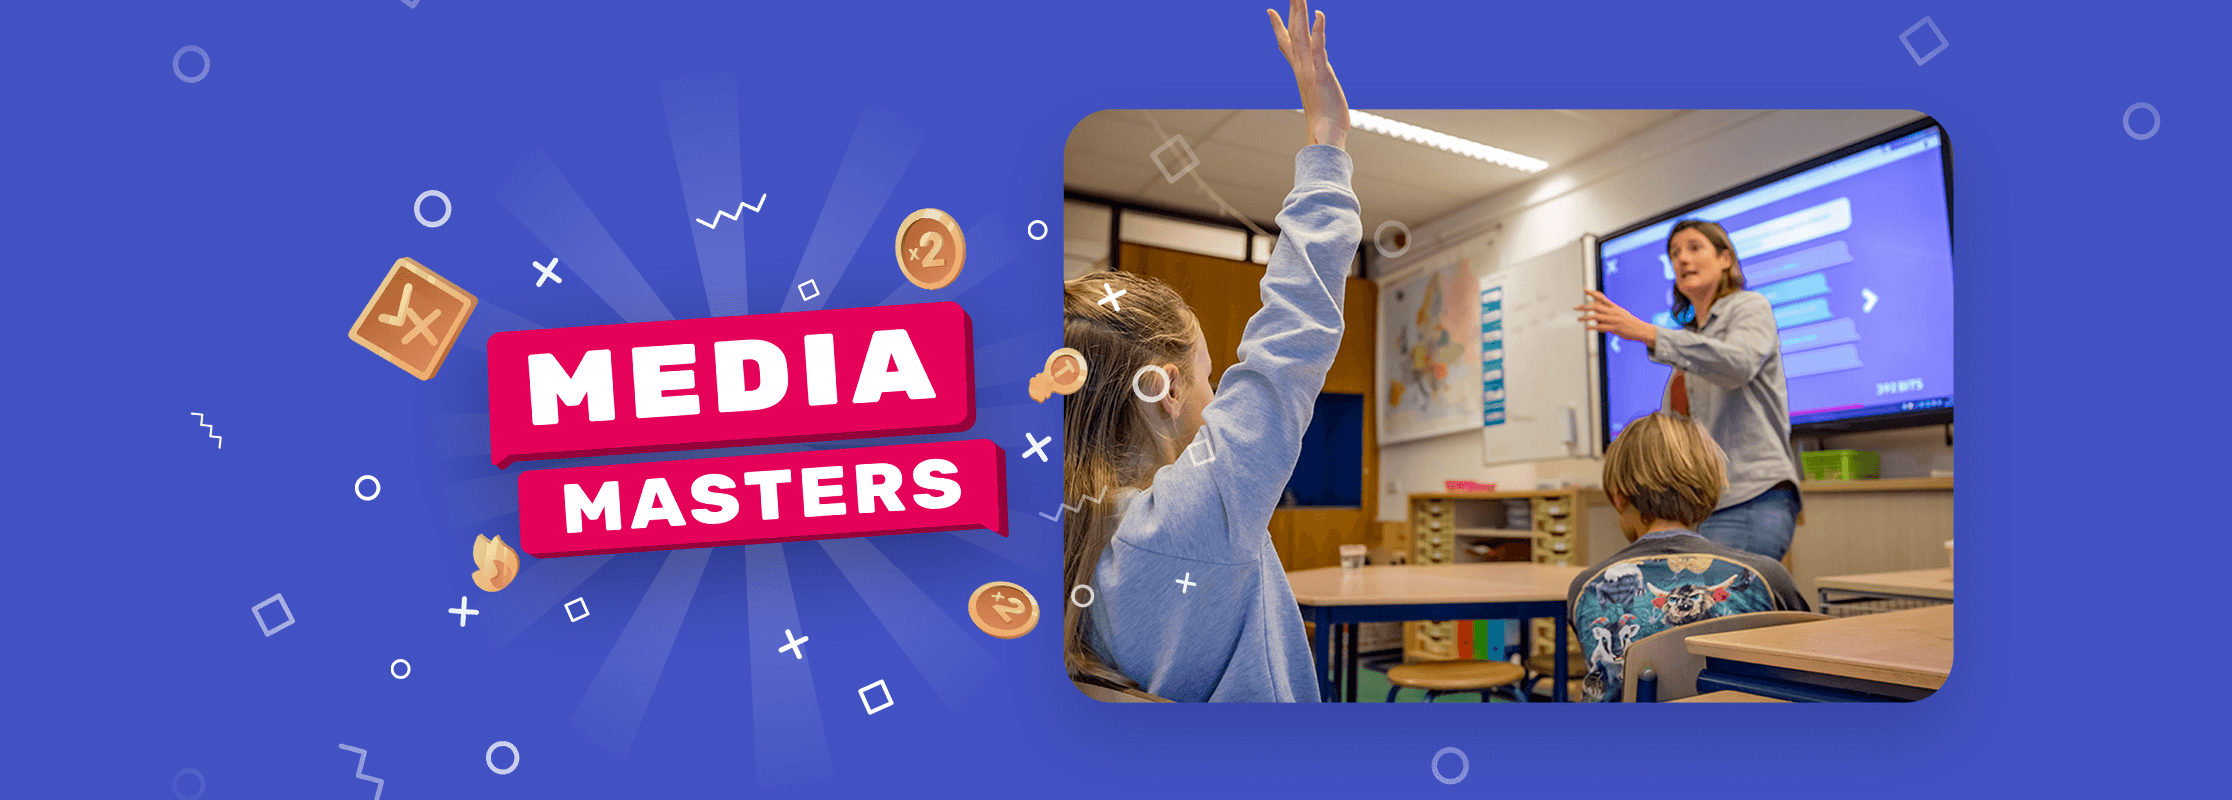 MediaMasters: serious game in >8,000 classrooms